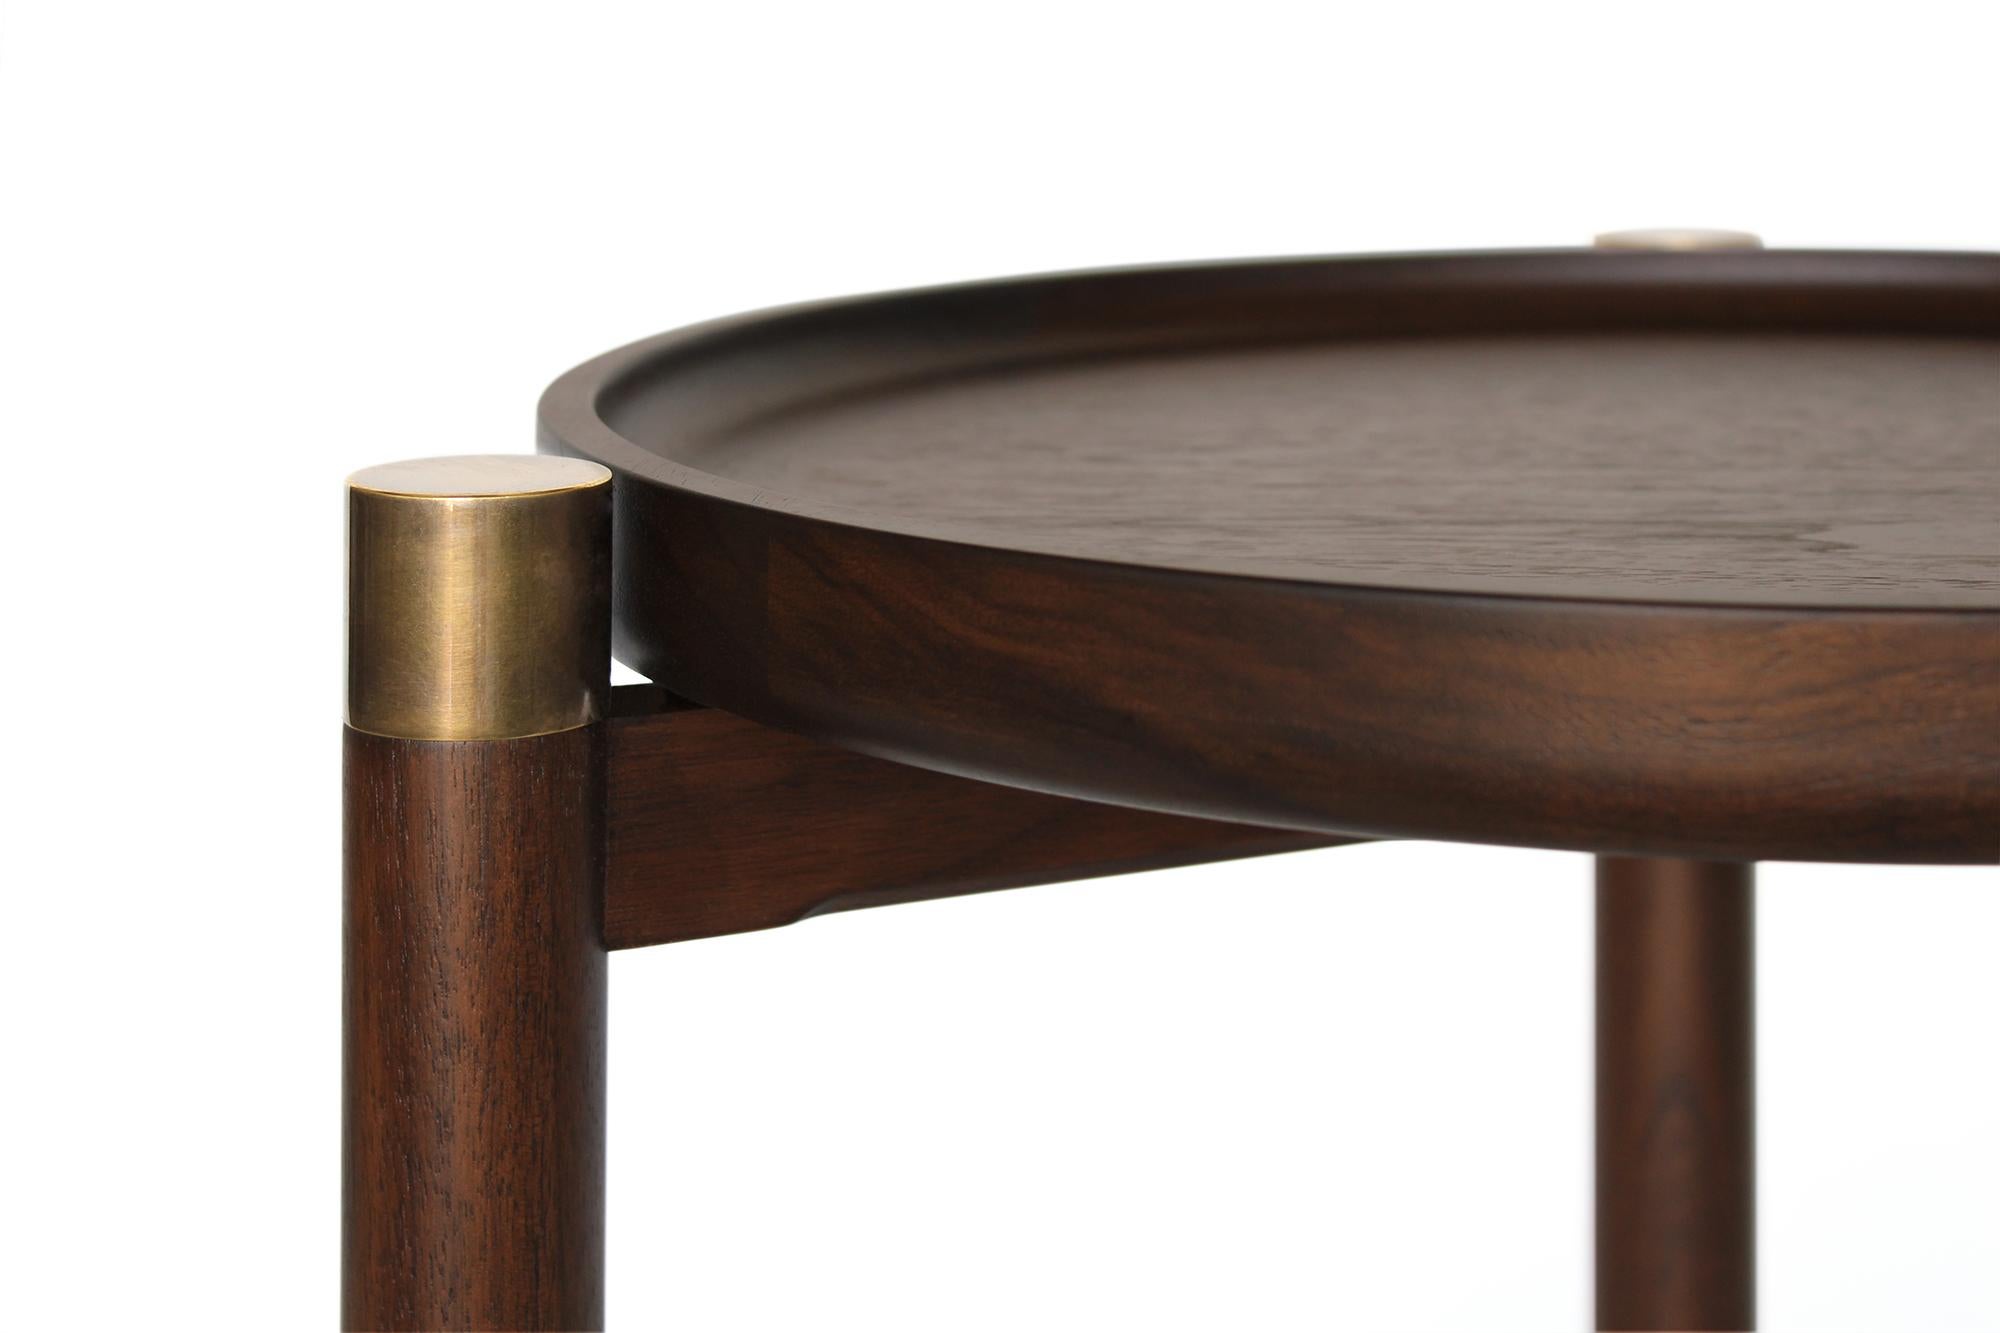 American Otto Round Accent Table in Medium Walnut with Antique Brass Fittings For Sale